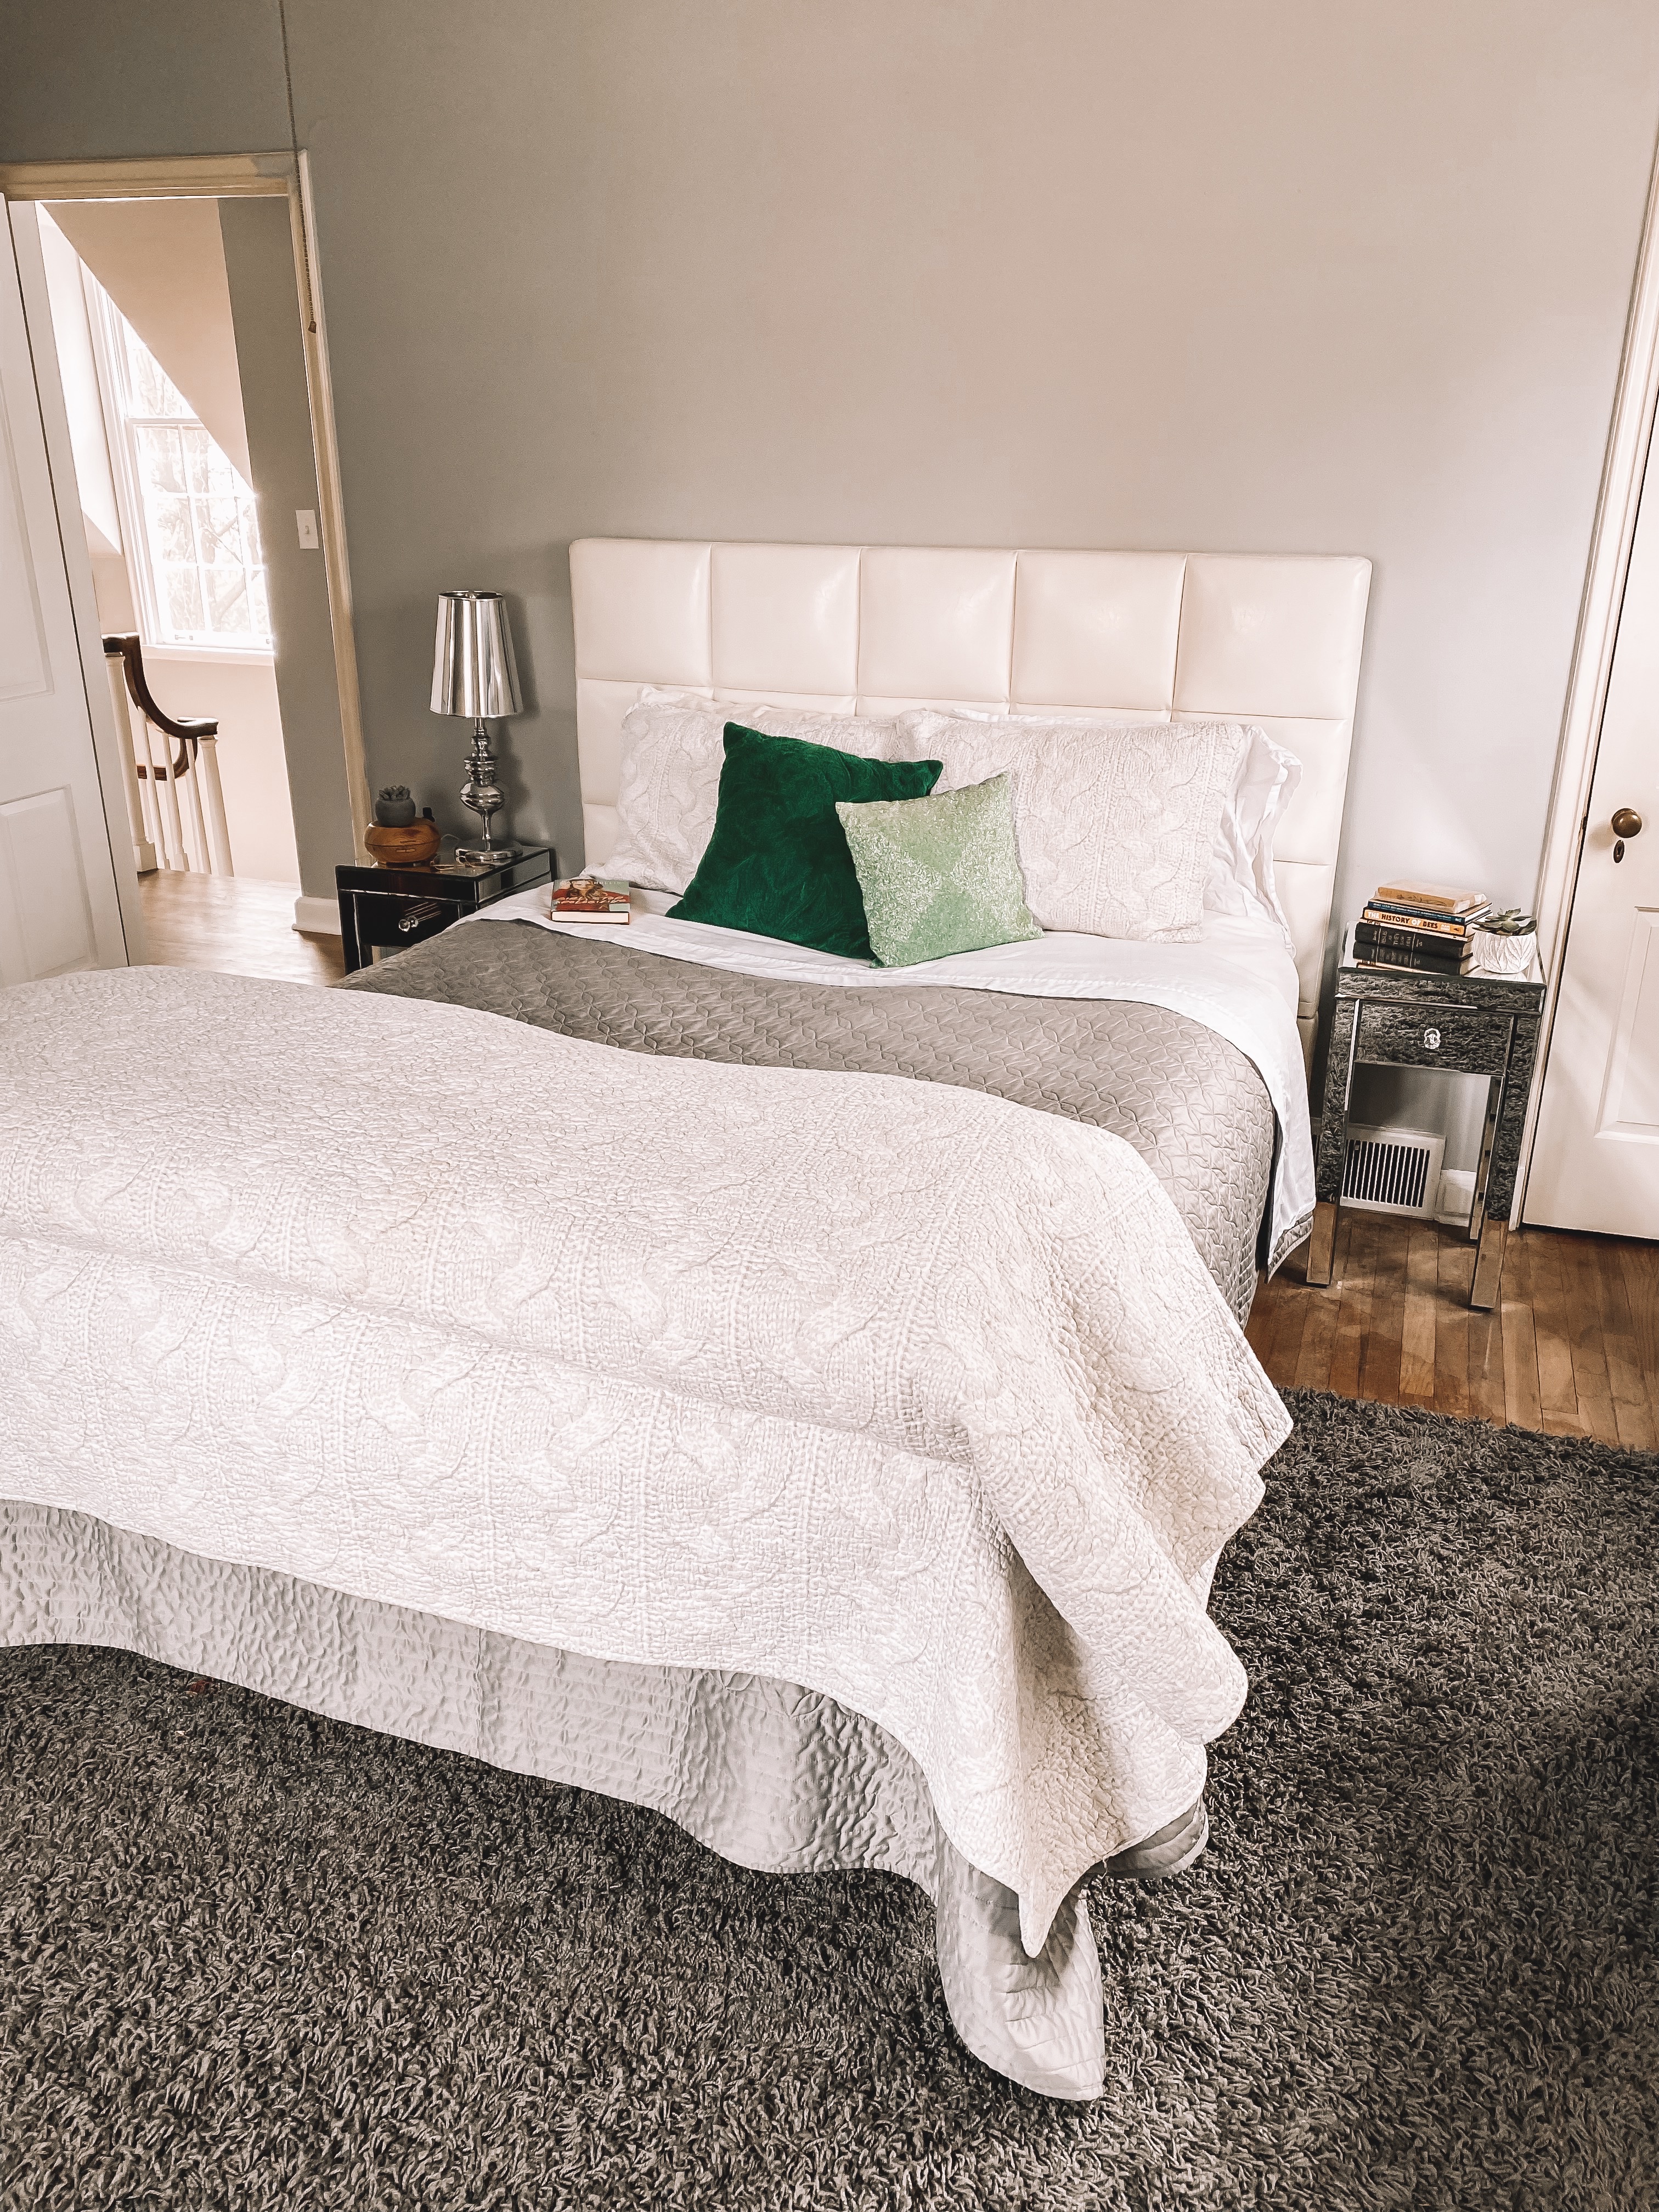 Photo of Candace's bedroom. She has white sheets, a grey comforter, a white quilted duvet, white pillows, and emerald green decorative pillows as well.